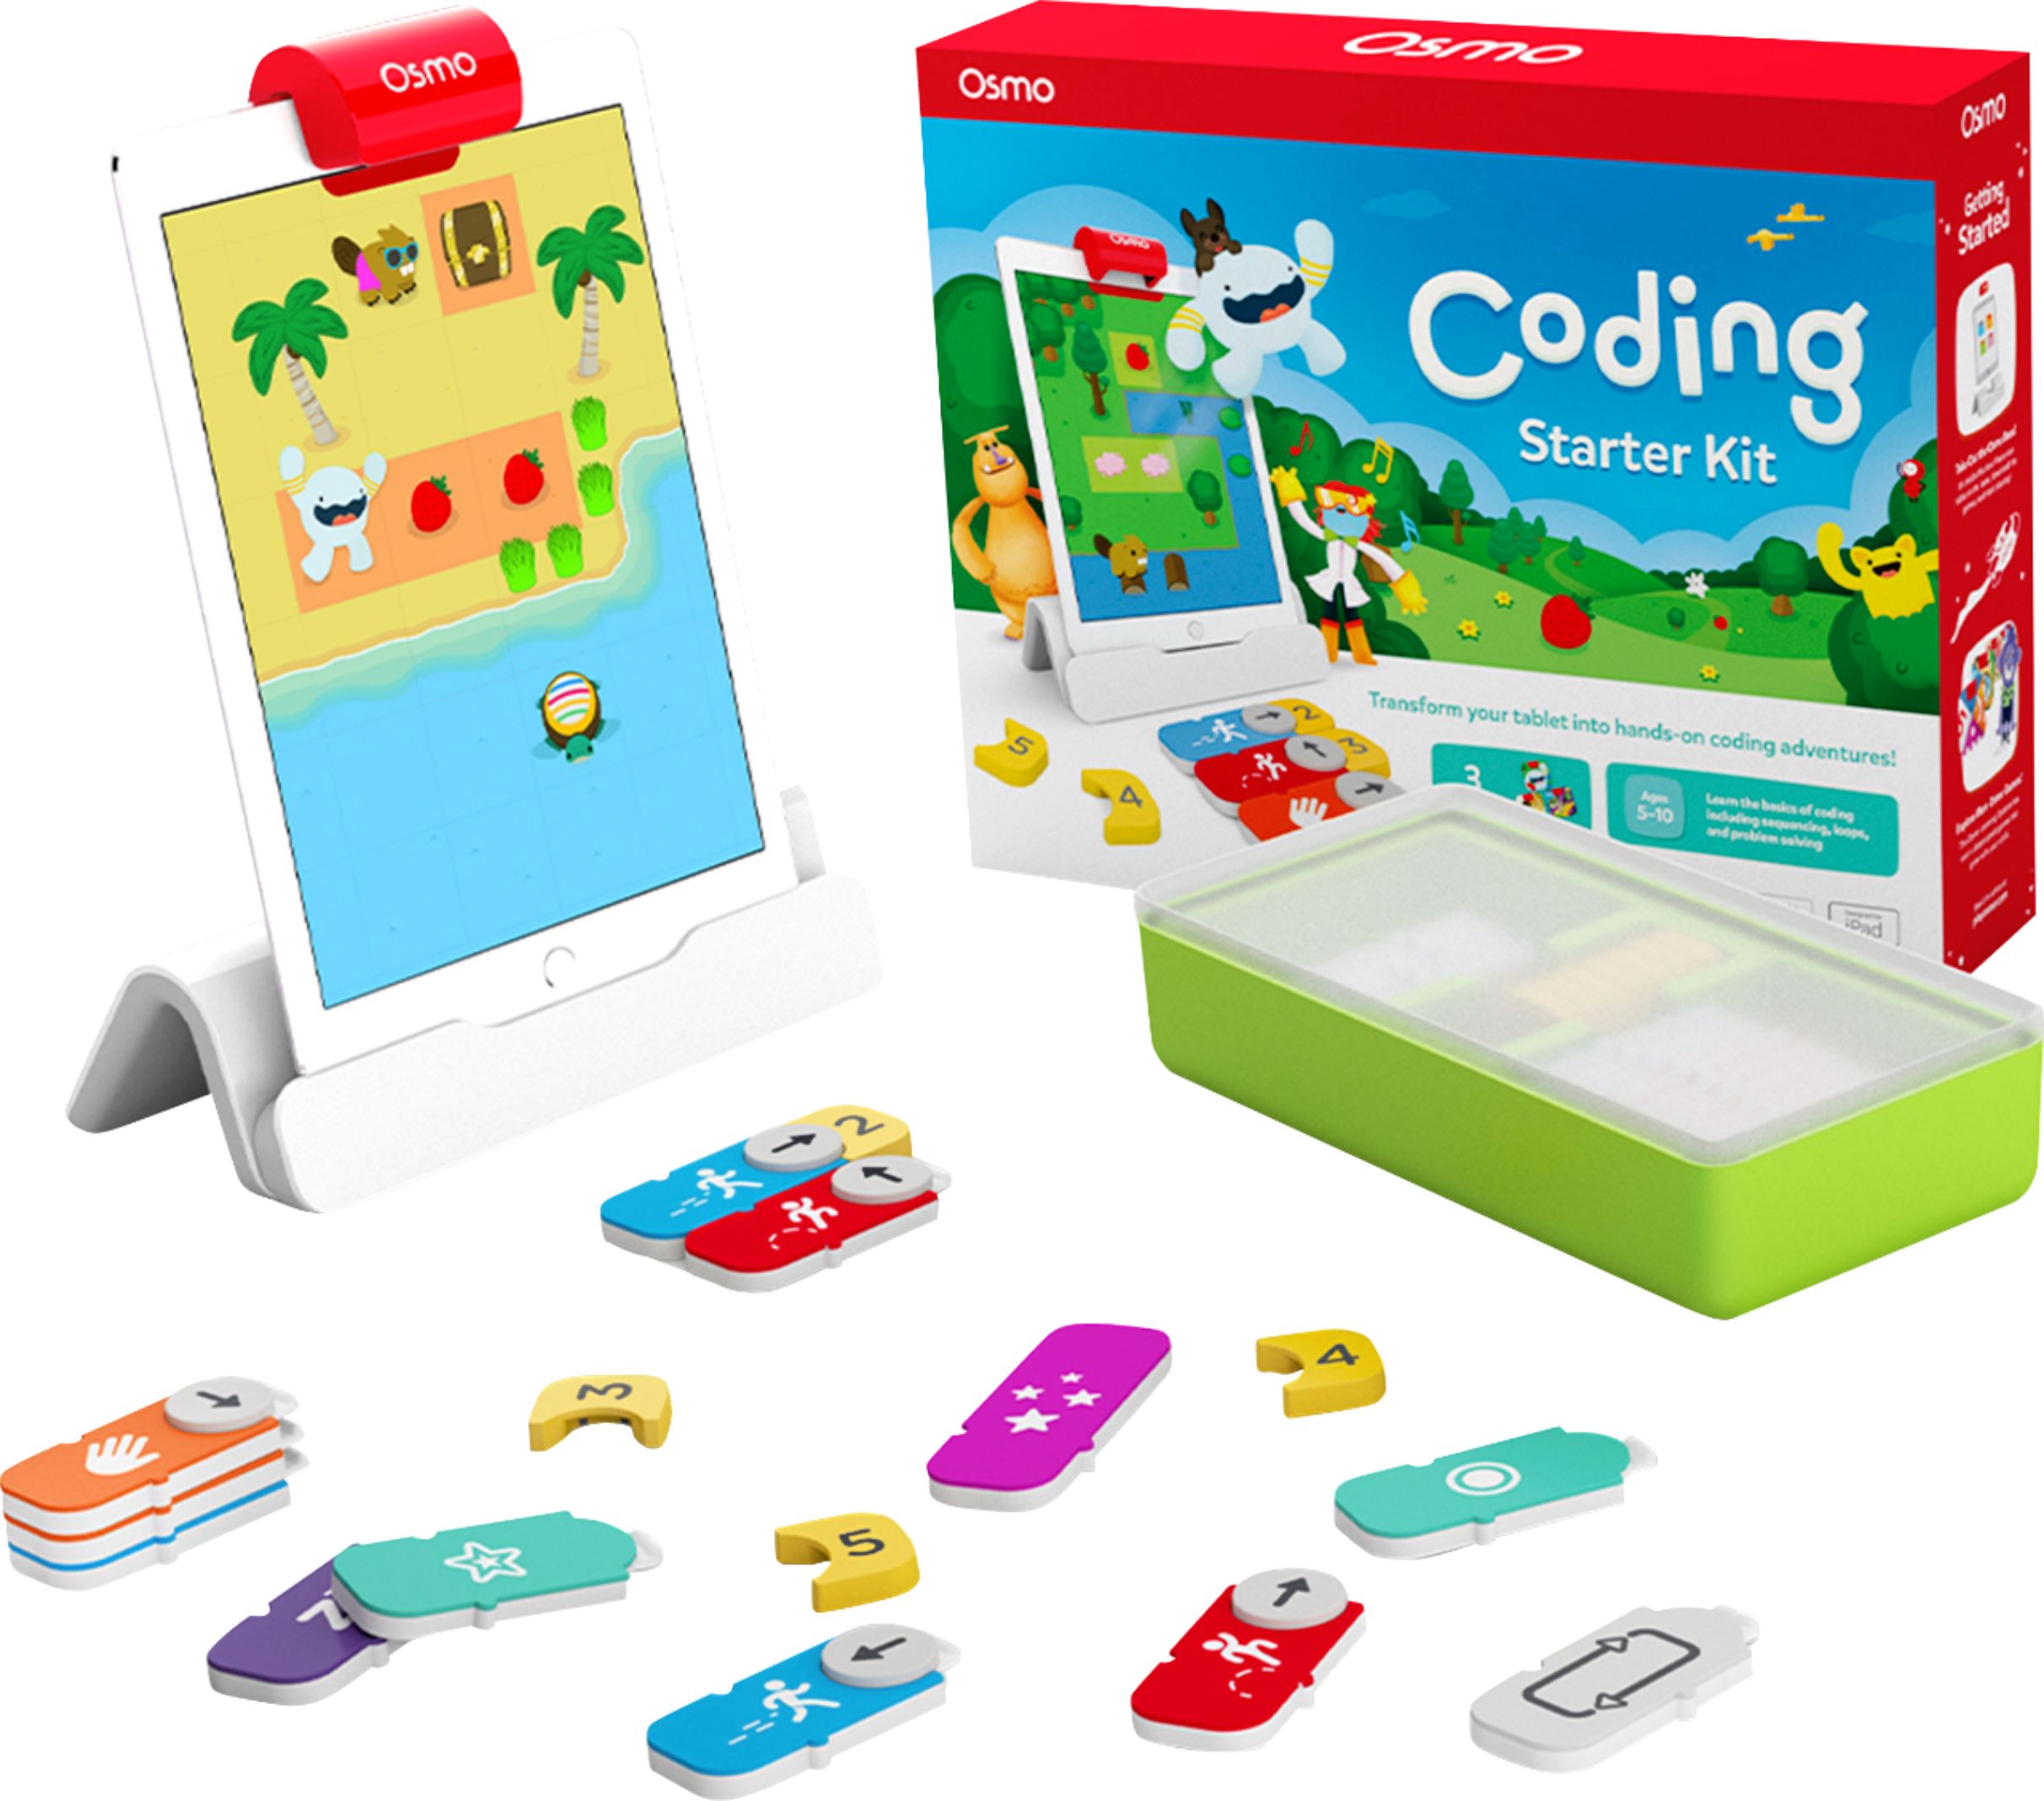 Osmo Coding Starter Kit for iPad - Ages 5-12 - Learn to Code, Coding Fundamentals & Coding Puzzles (Osmo Base Included)